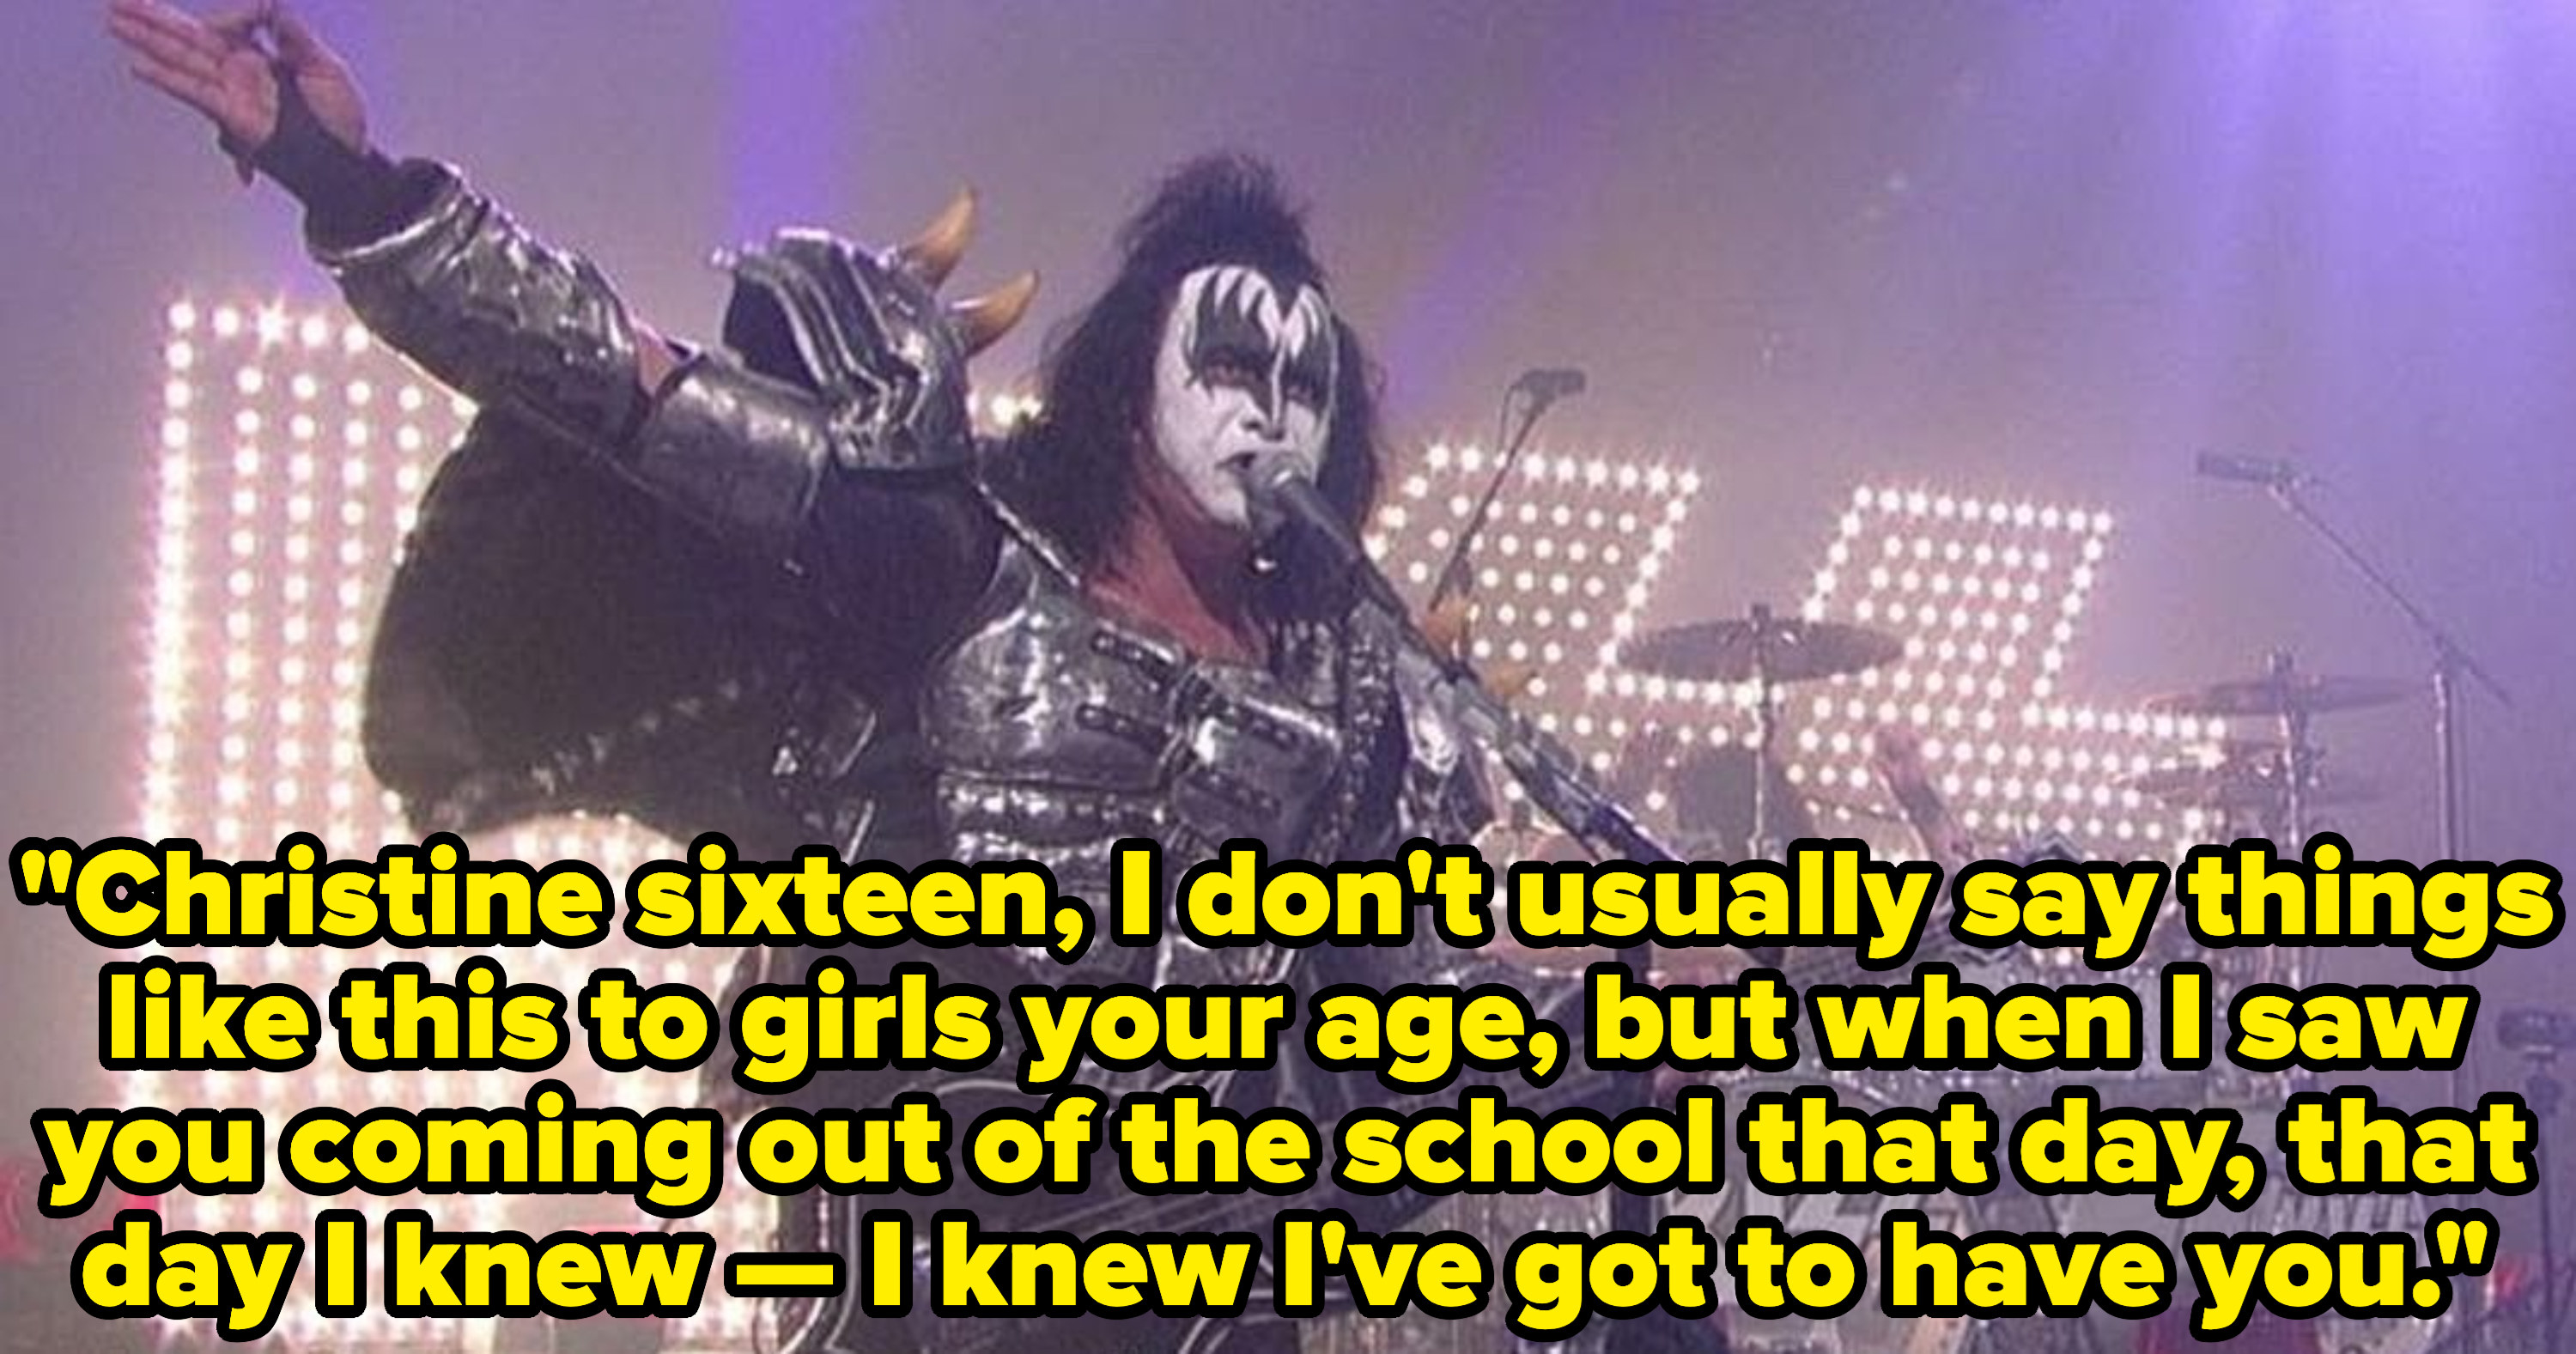 Kiss singing: &quot;Christine sixteen, I don&#x27;t usually say things like this to girls your age, but when I saw you coming out of the school that day, I knew I&#x27;ve got to have you&quot;